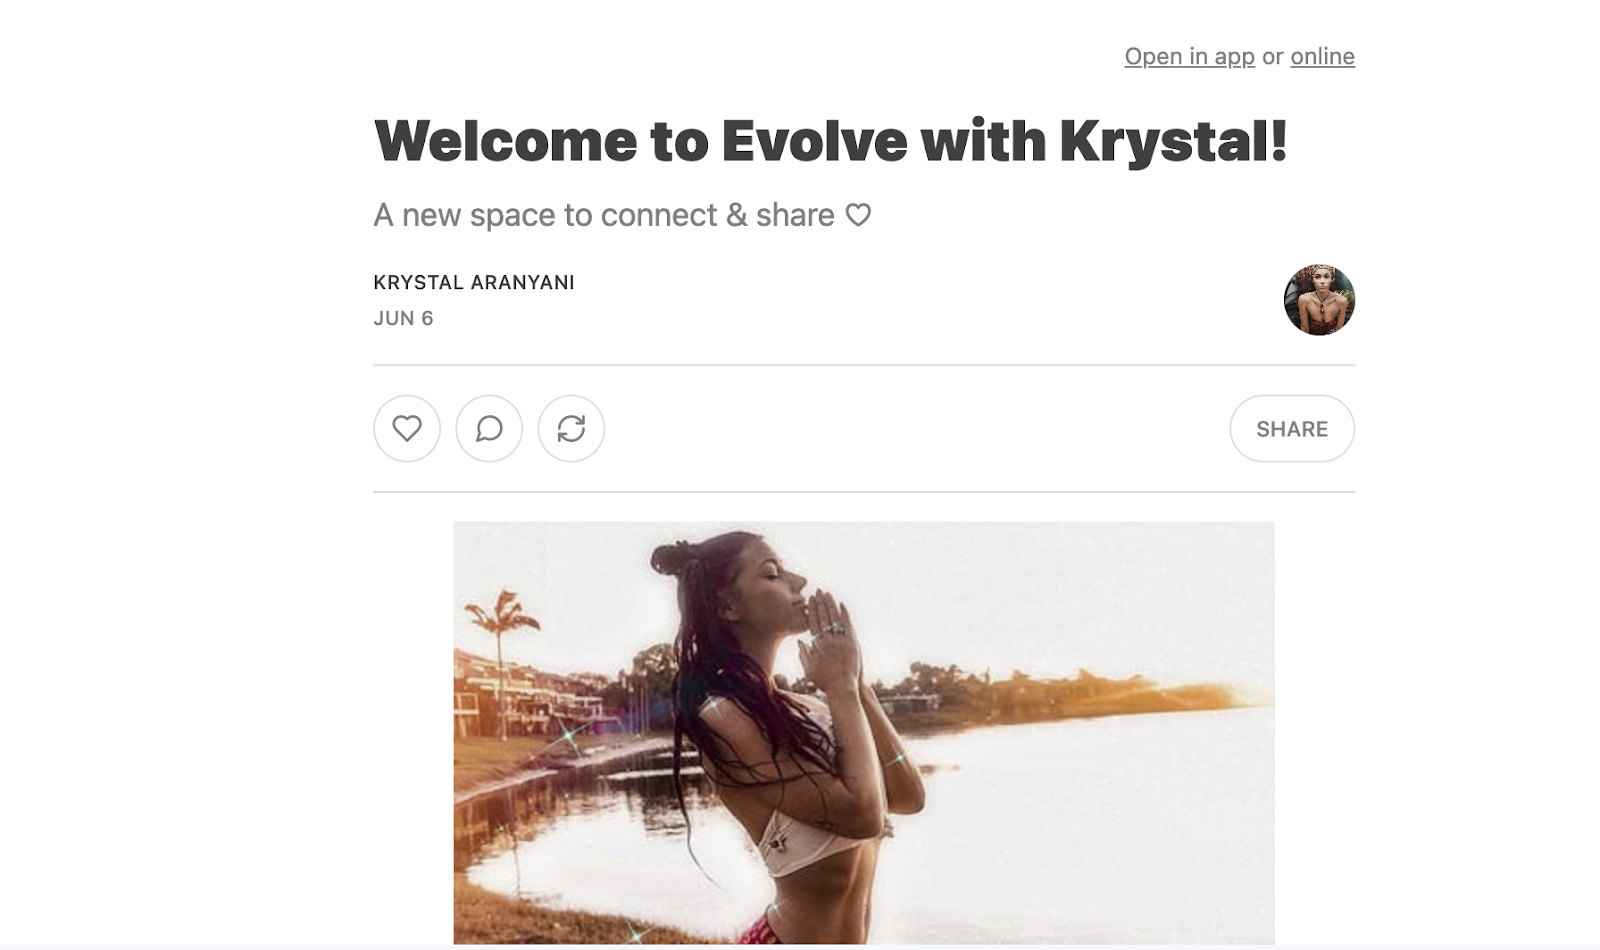 welcome email example from Evolve with Krystal